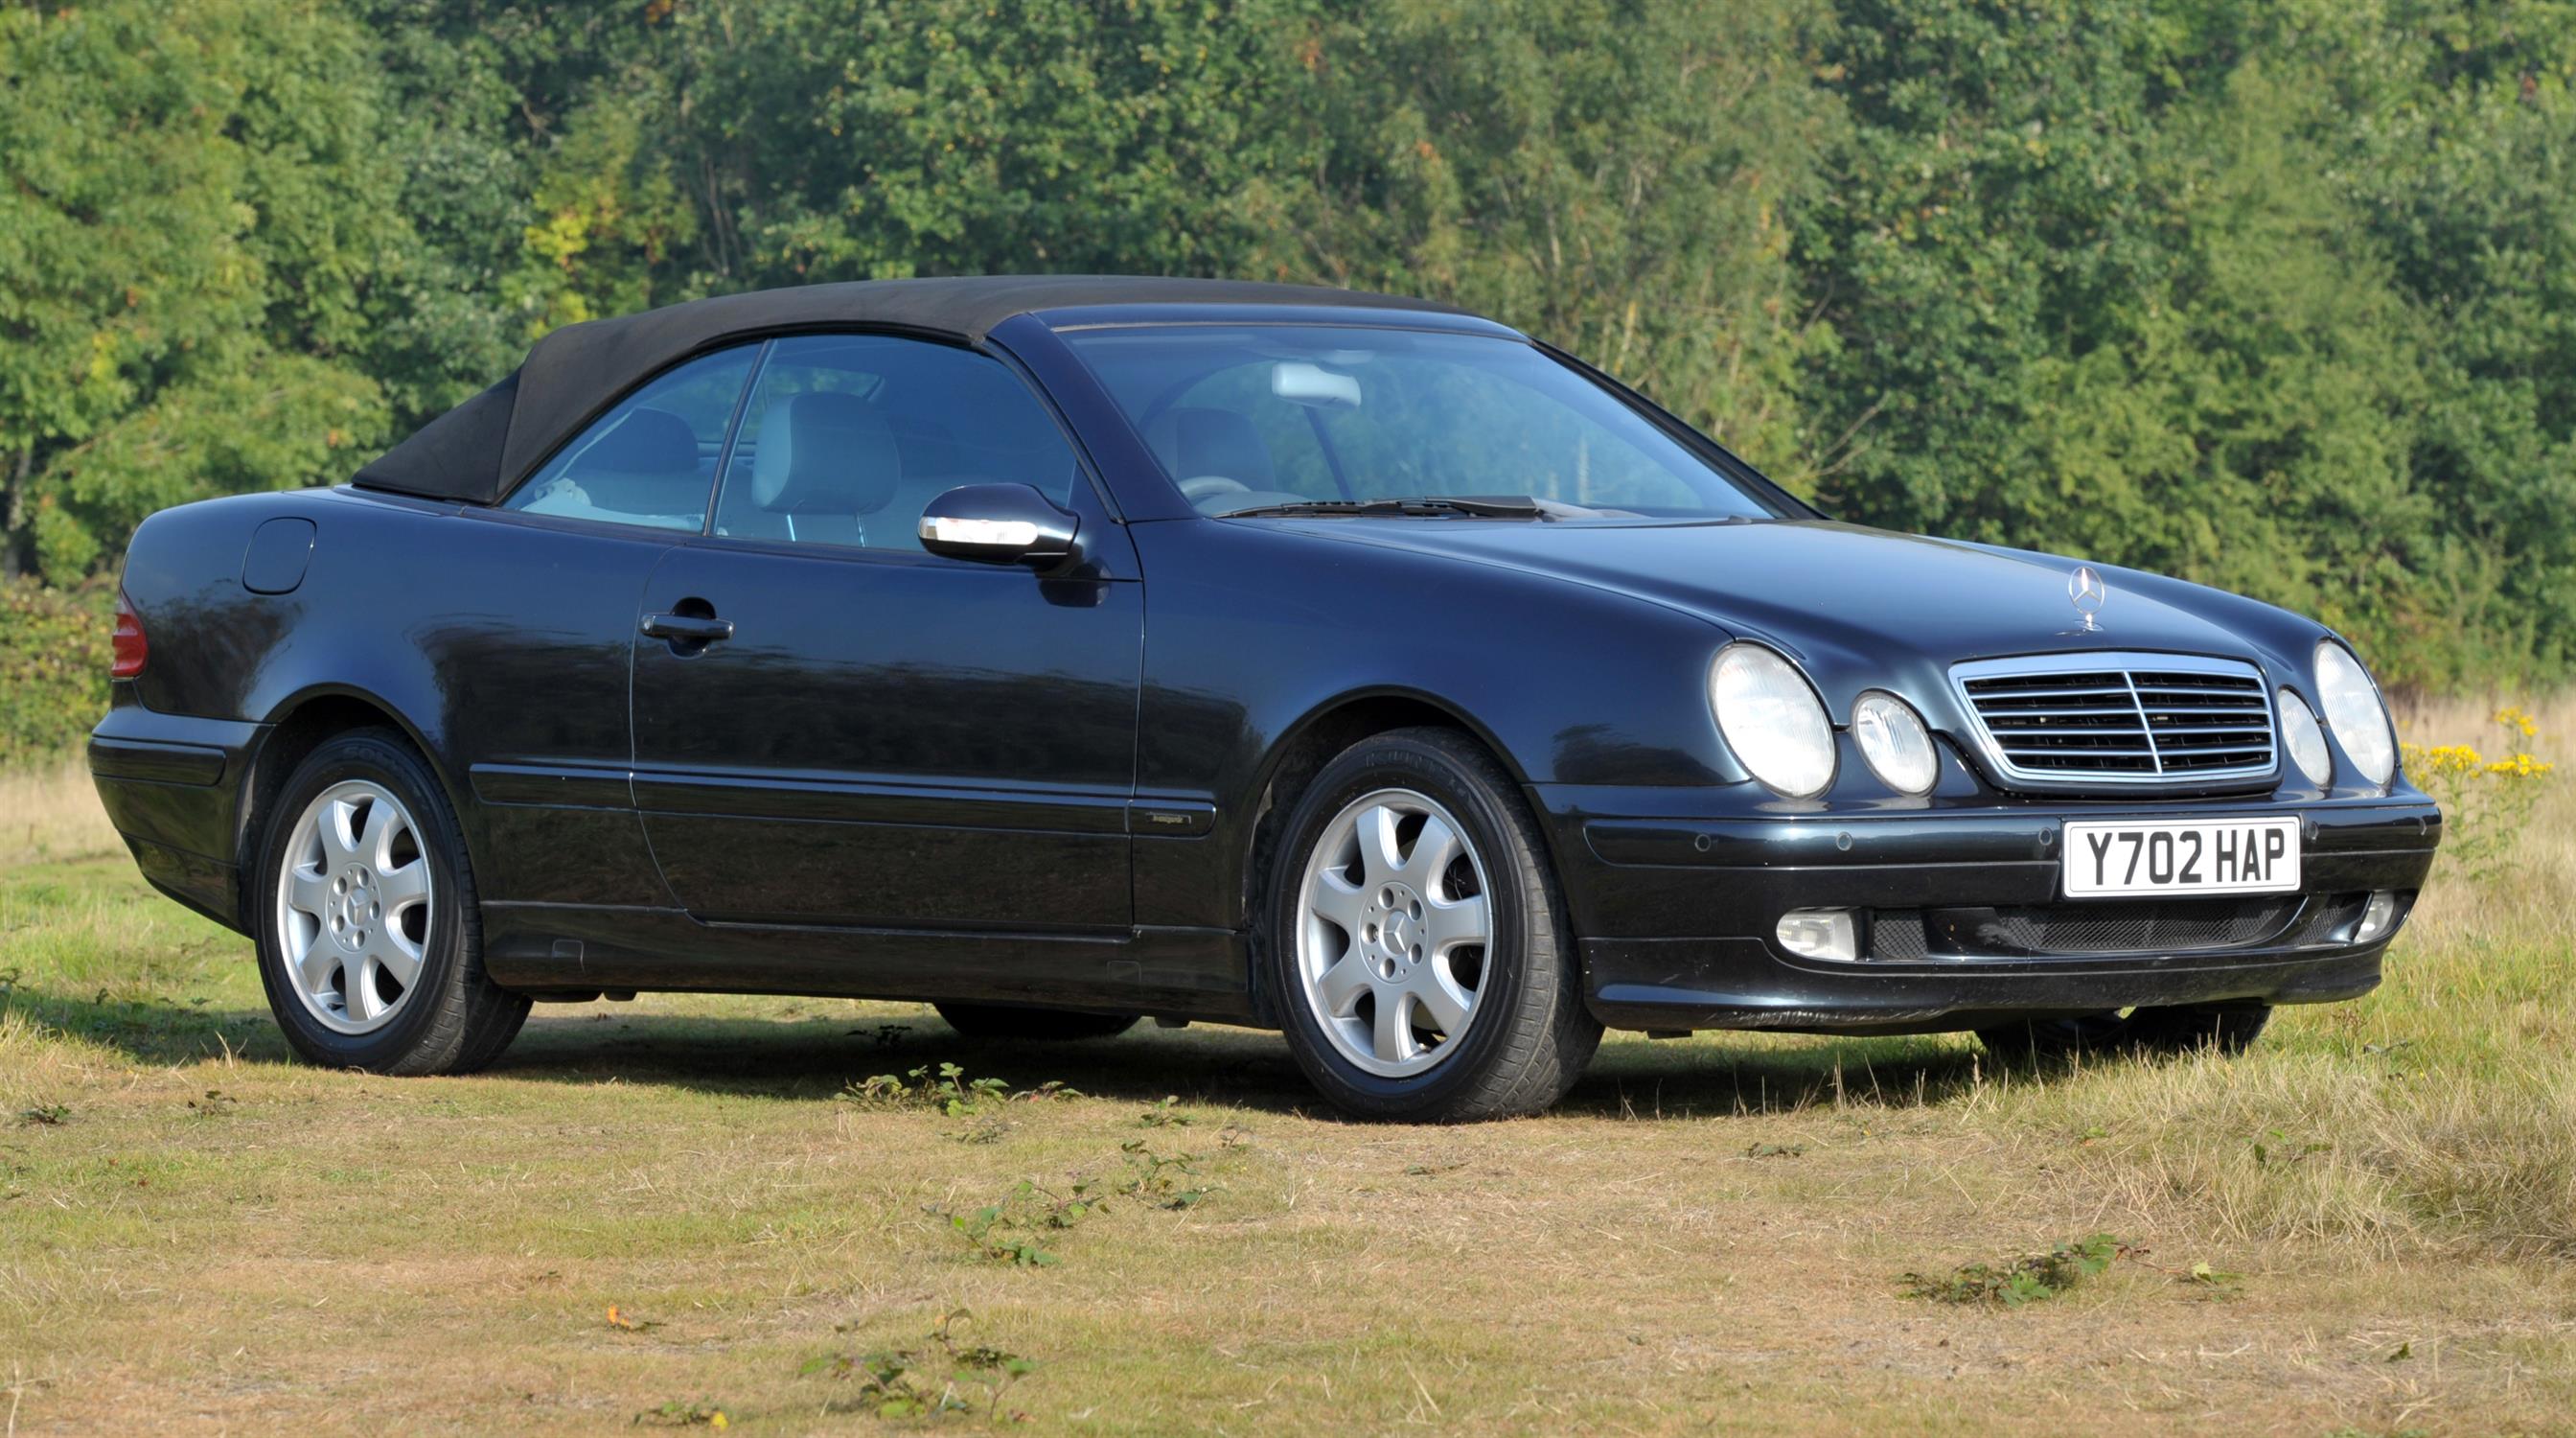 2001 Mercedes CLK 200 Petrol Convertible Automatic. Registration number: Y702 HAP. - Image 21 of 21